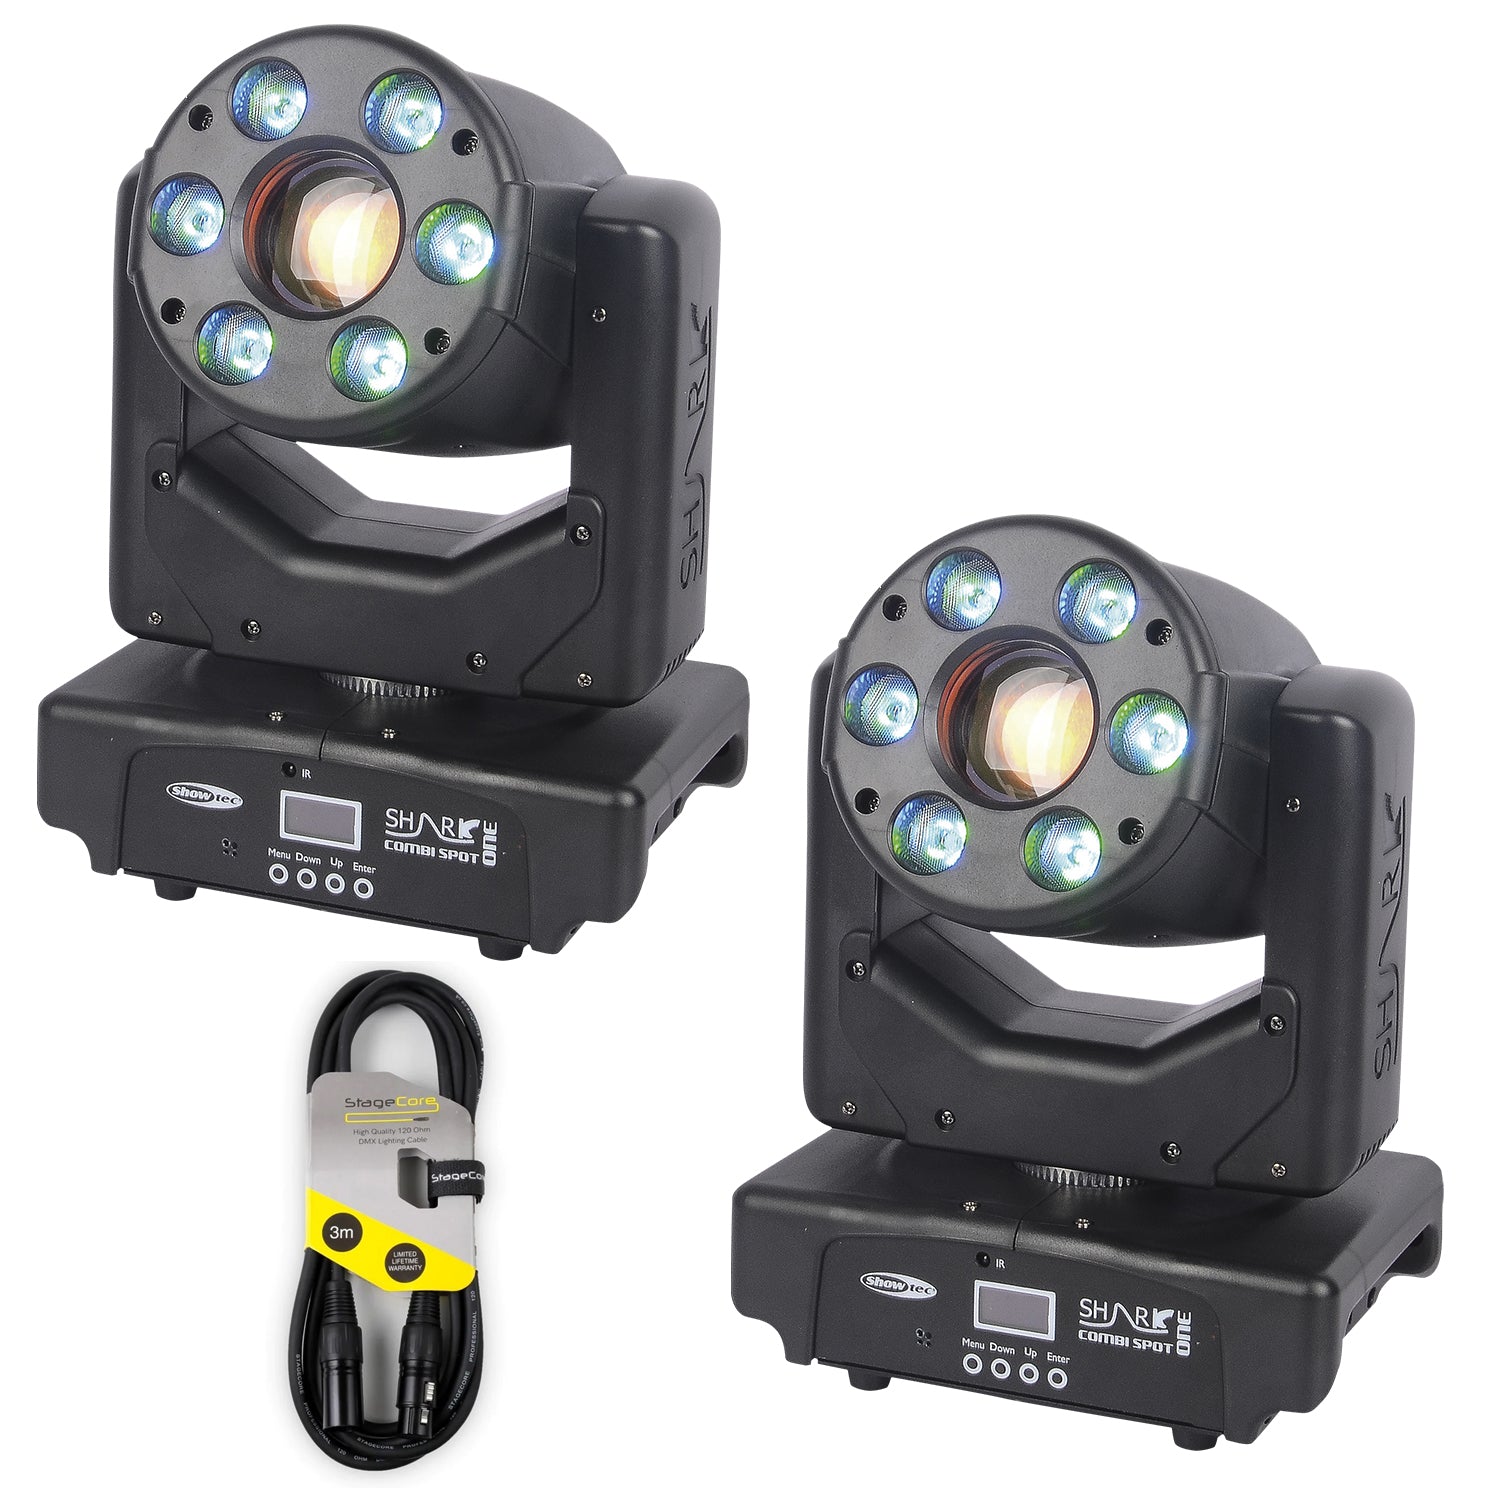 2 x Showtec Shark Combi Spot One 6 x 8 W RGBW LED Wash and Spot Moving Head